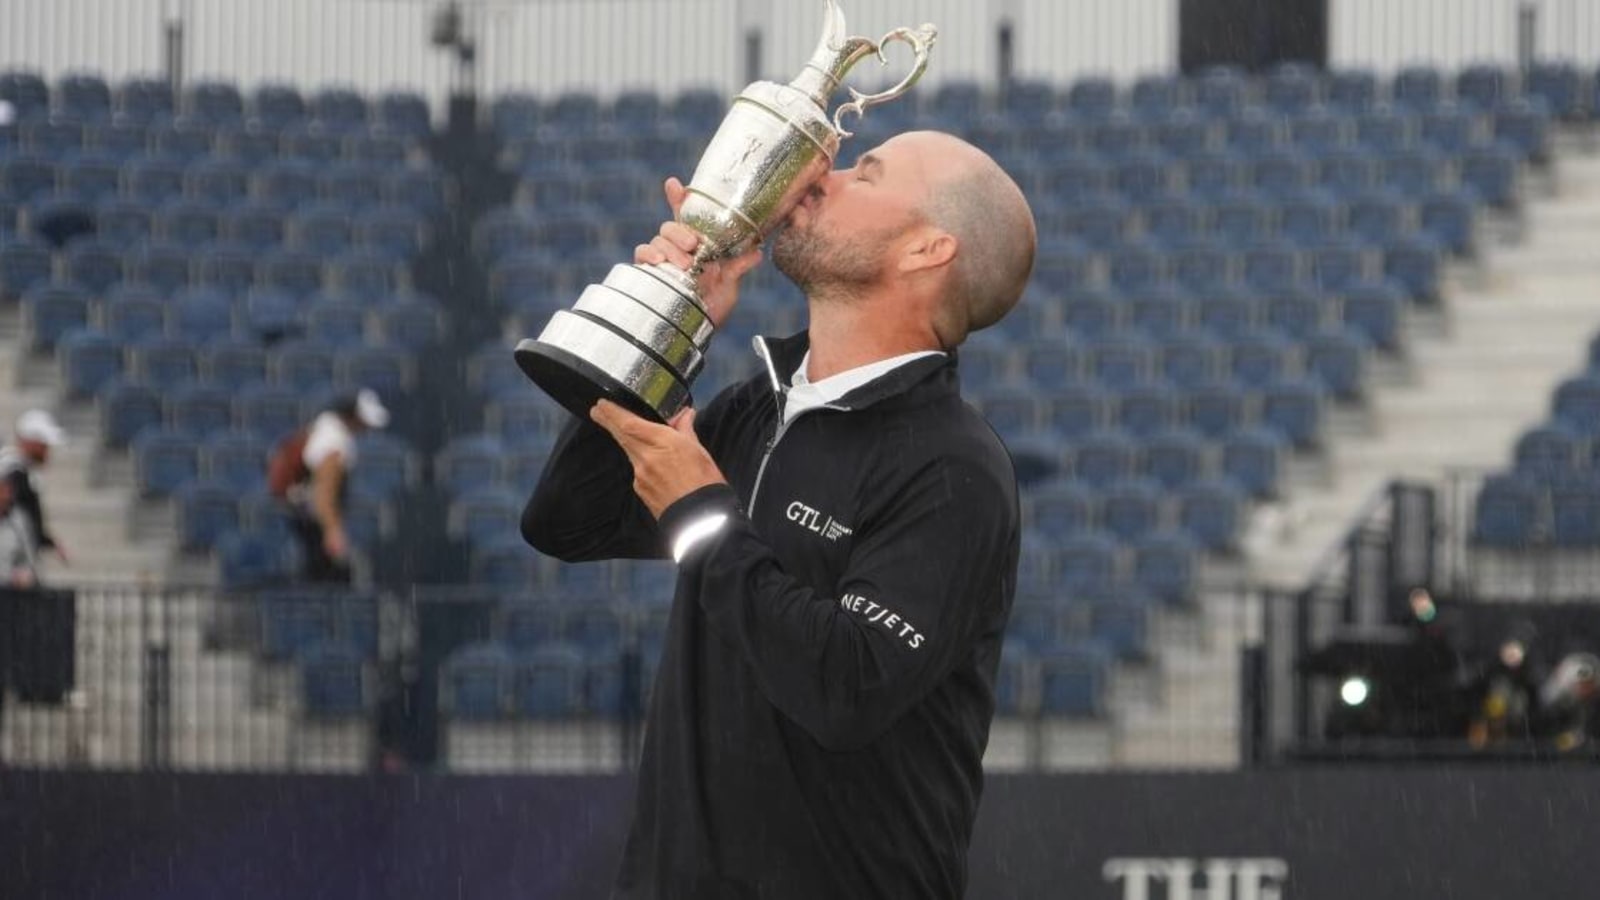 Brian Harman chugs beer out of Claret Jug after The Open win